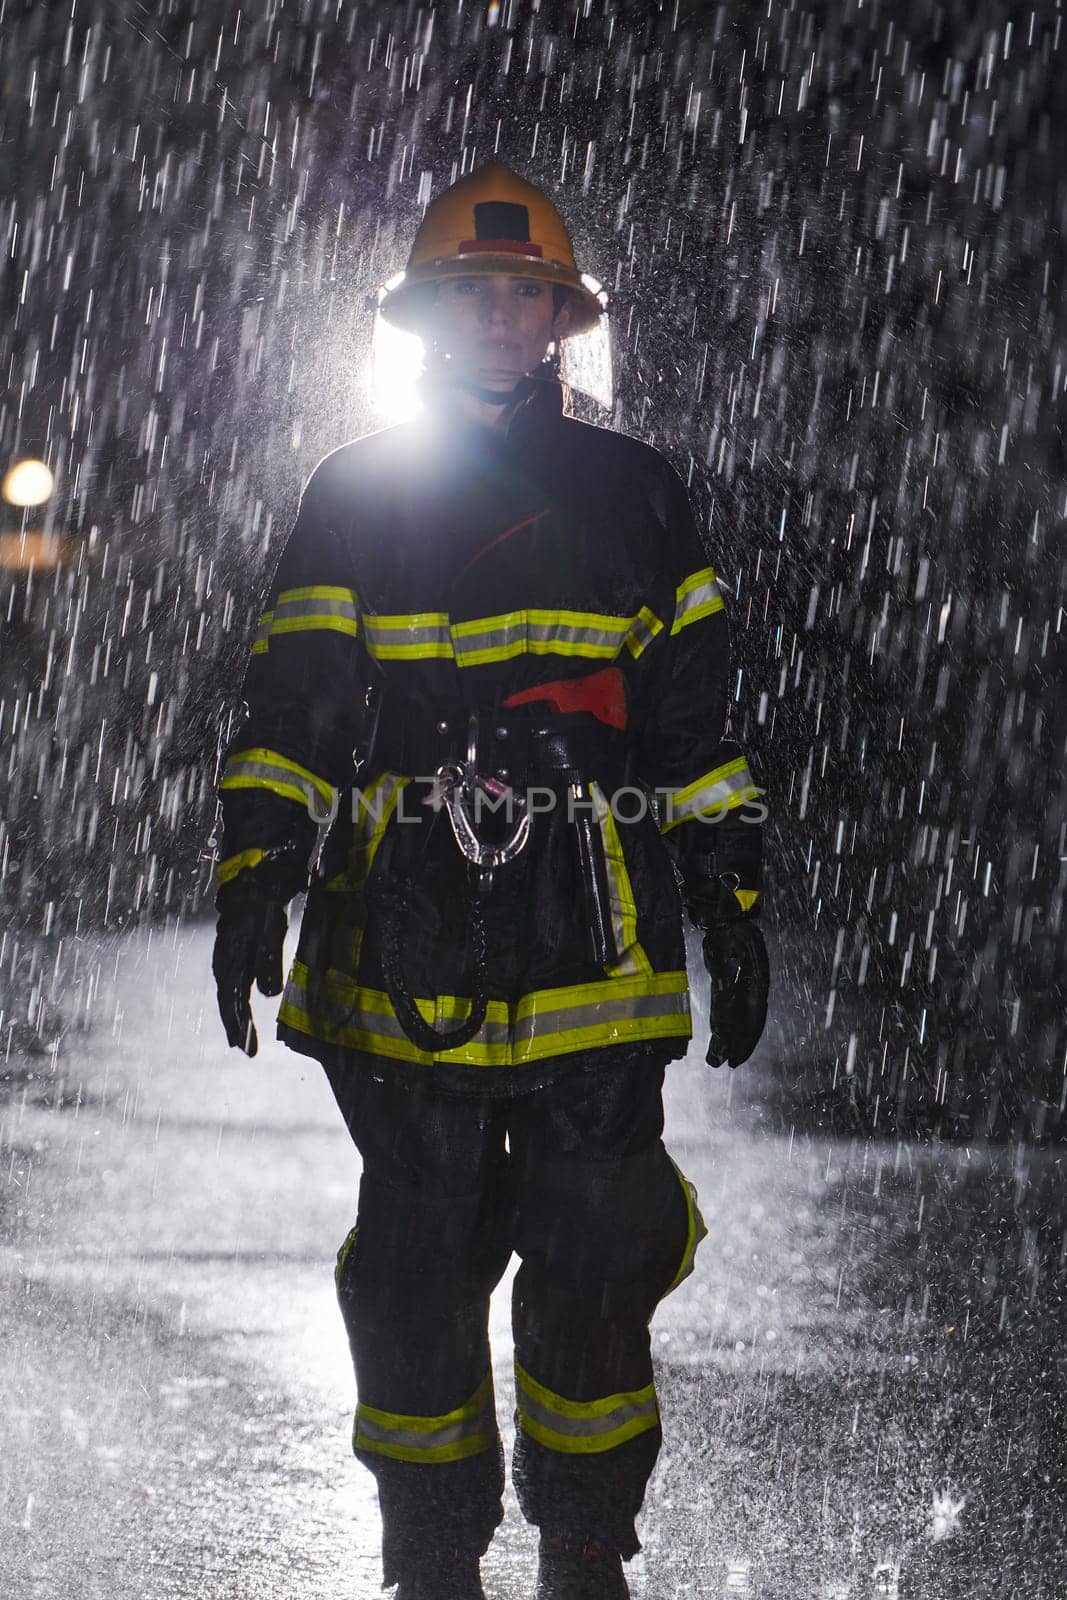 A determined female firefighter in a professional uniform striding through the dangerous, rainy night on a daring rescue mission, showcasing her unwavering bravery and commitment to saving lives. by dotshock